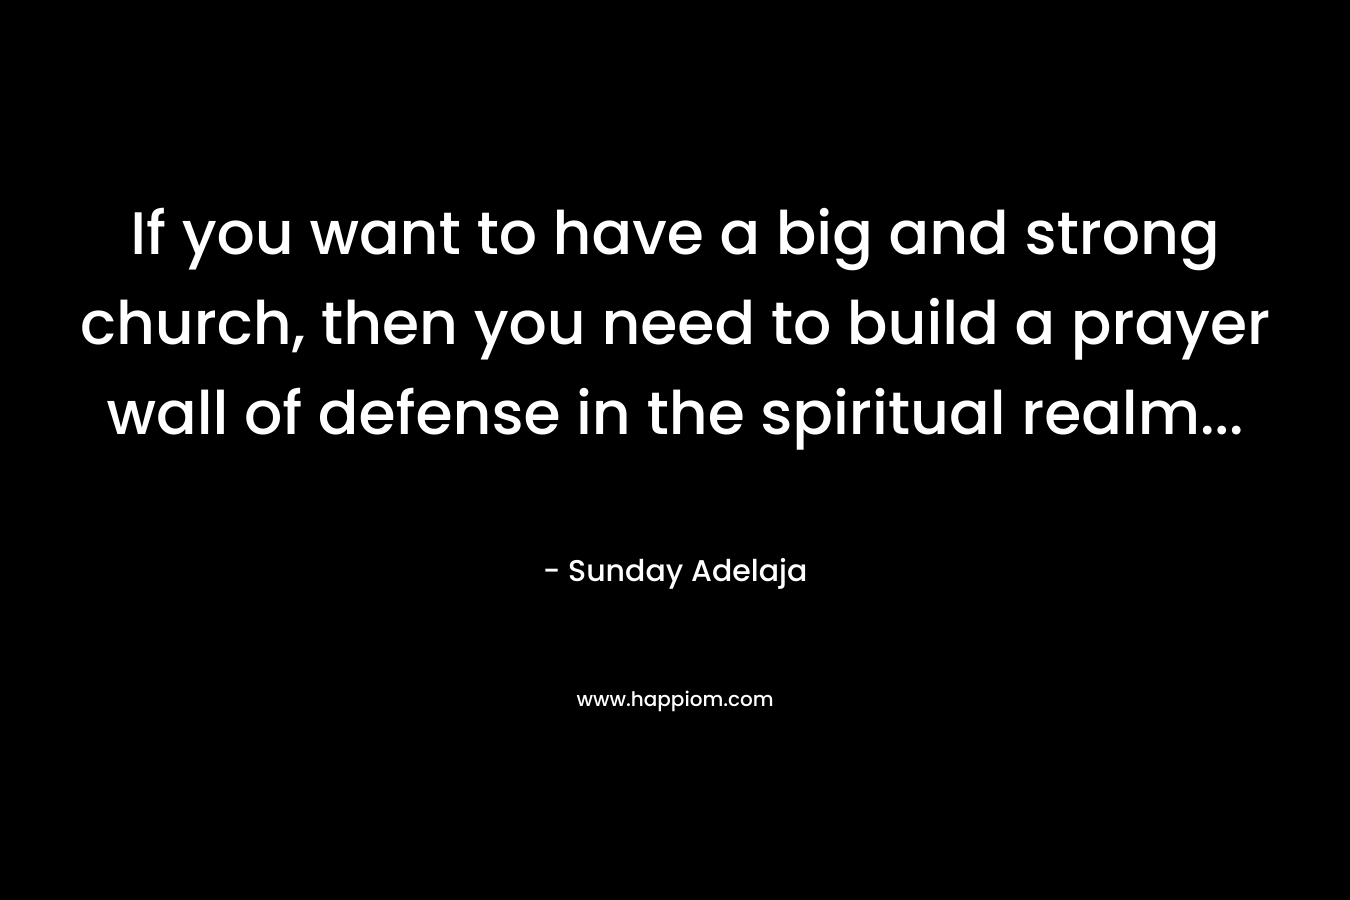 If you want to have a big and strong church, then you need to build a prayer wall of defense in the spiritual realm...